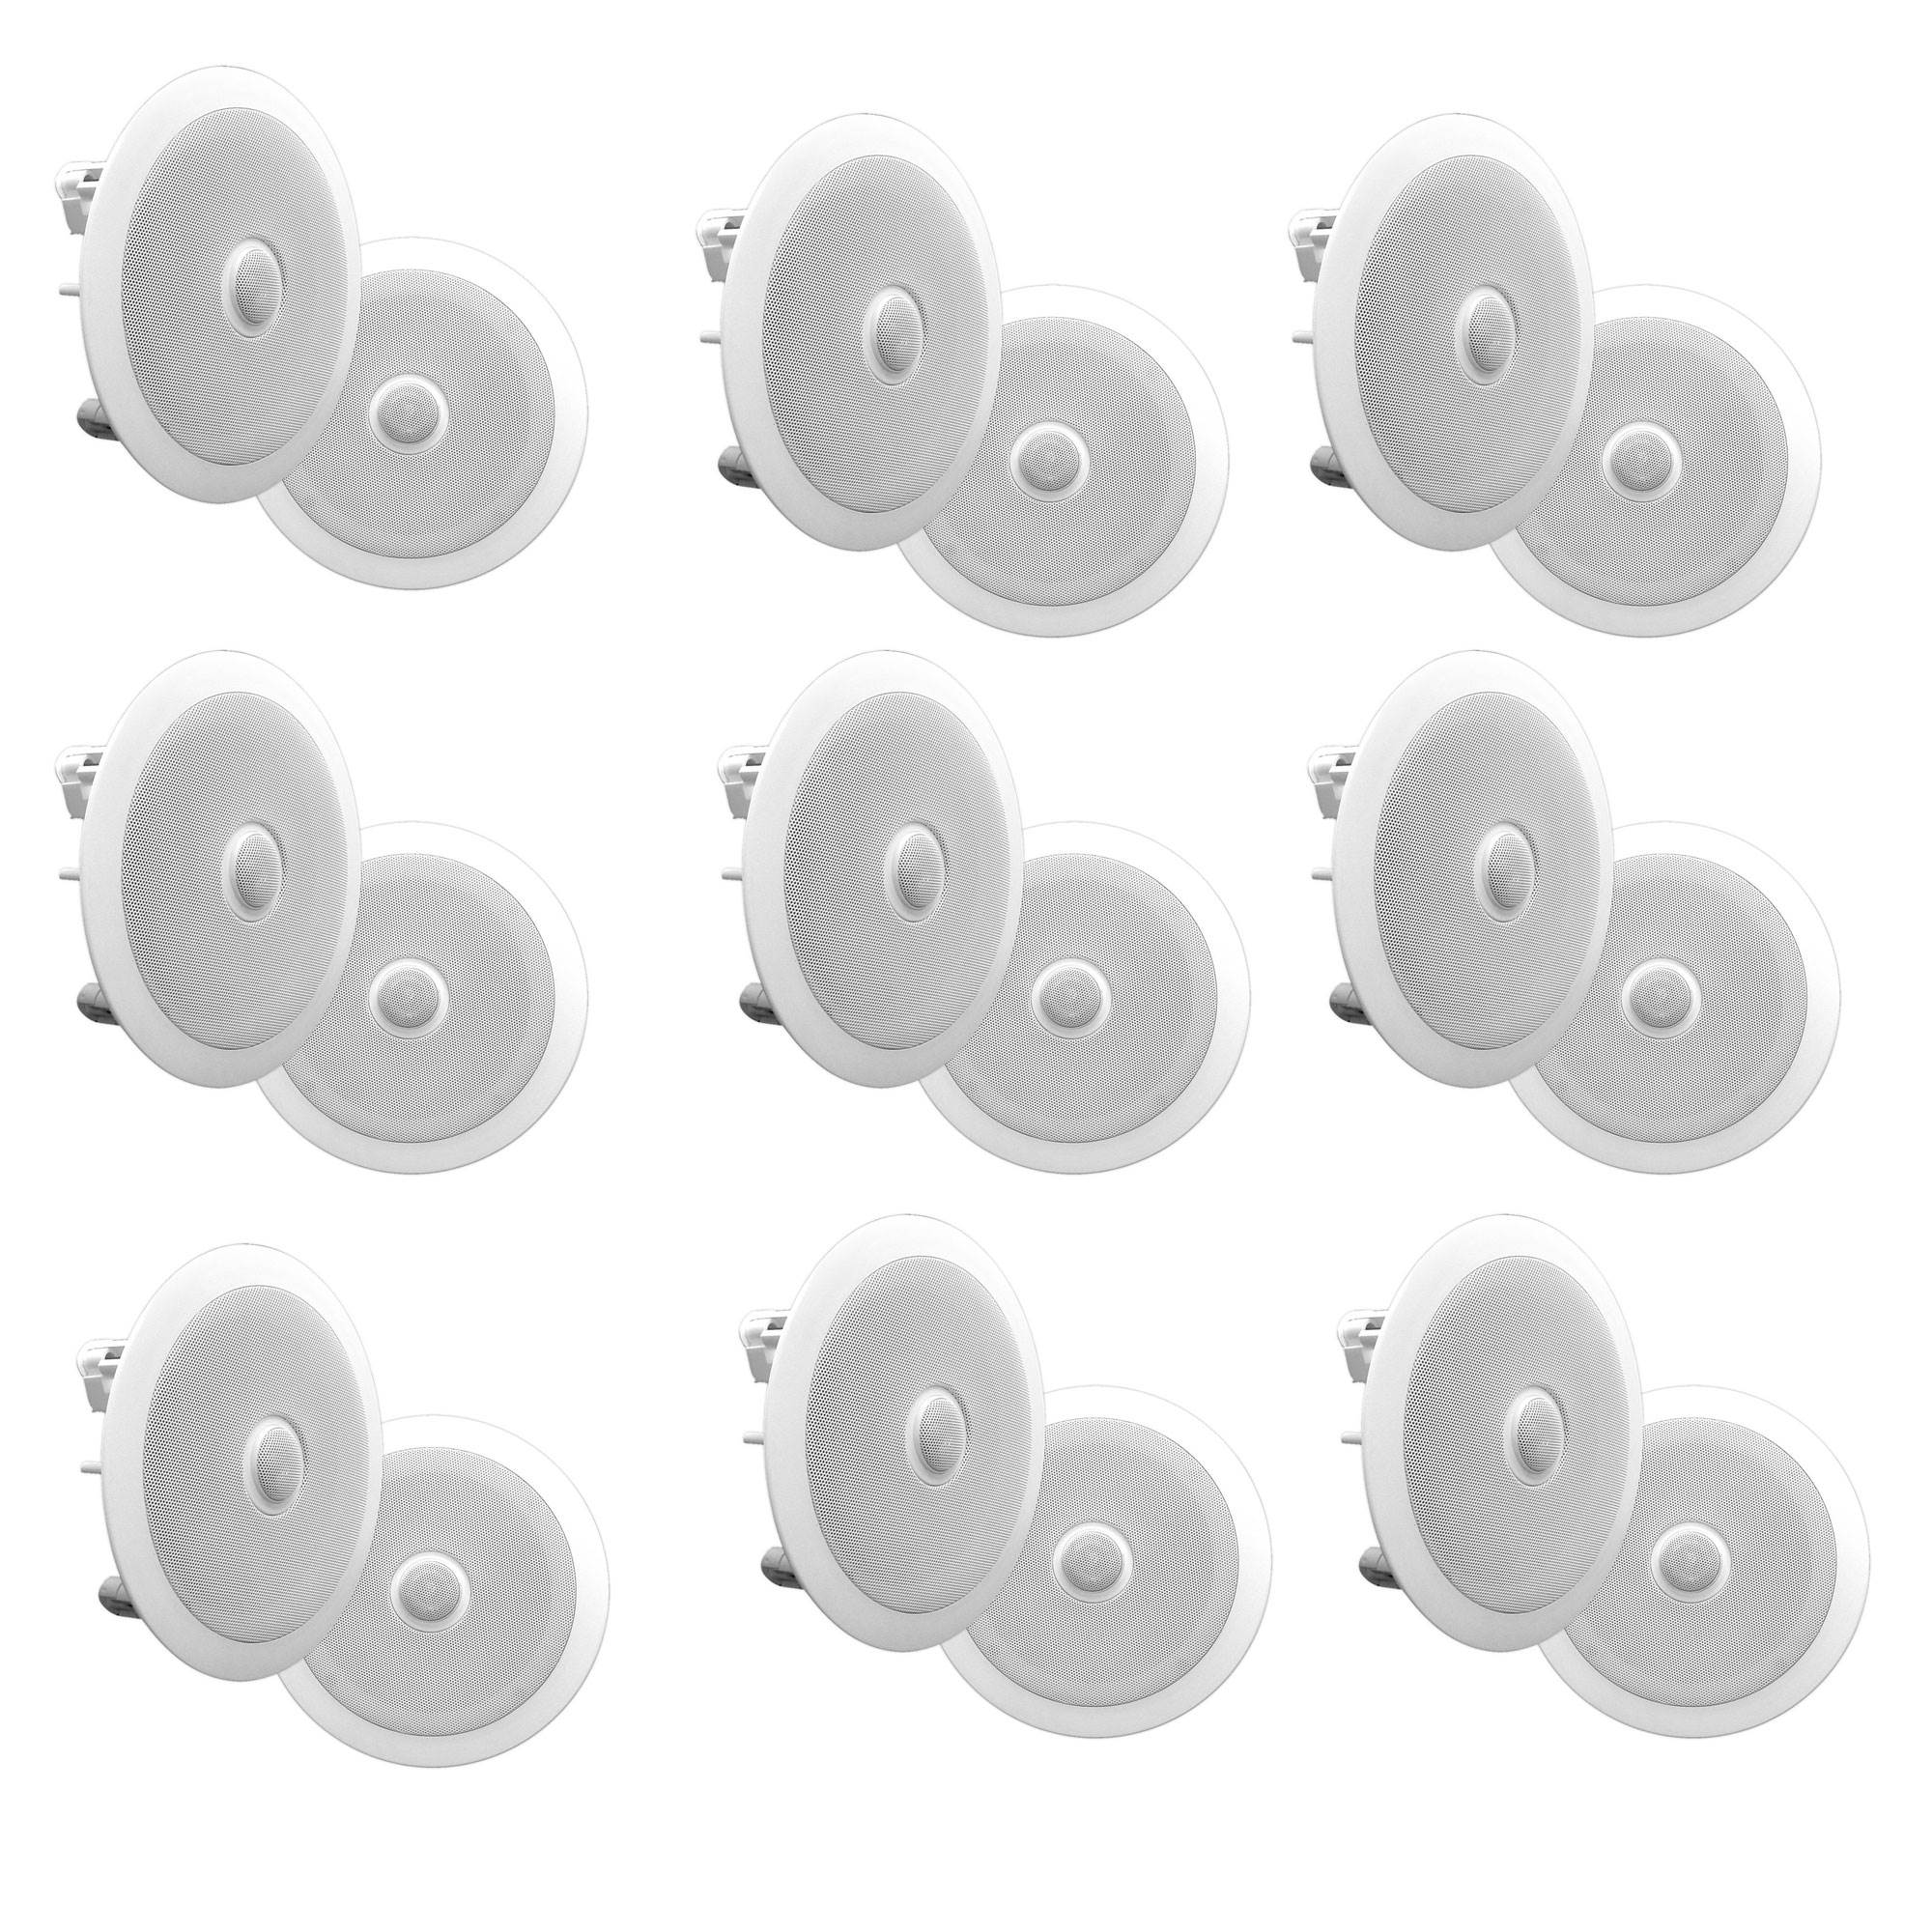 PYLE PDIC80 8 Inch 300 Watt 2 Way In Ceiling/Wall Speakers System Home (9 Pairs) - image 1 of 8